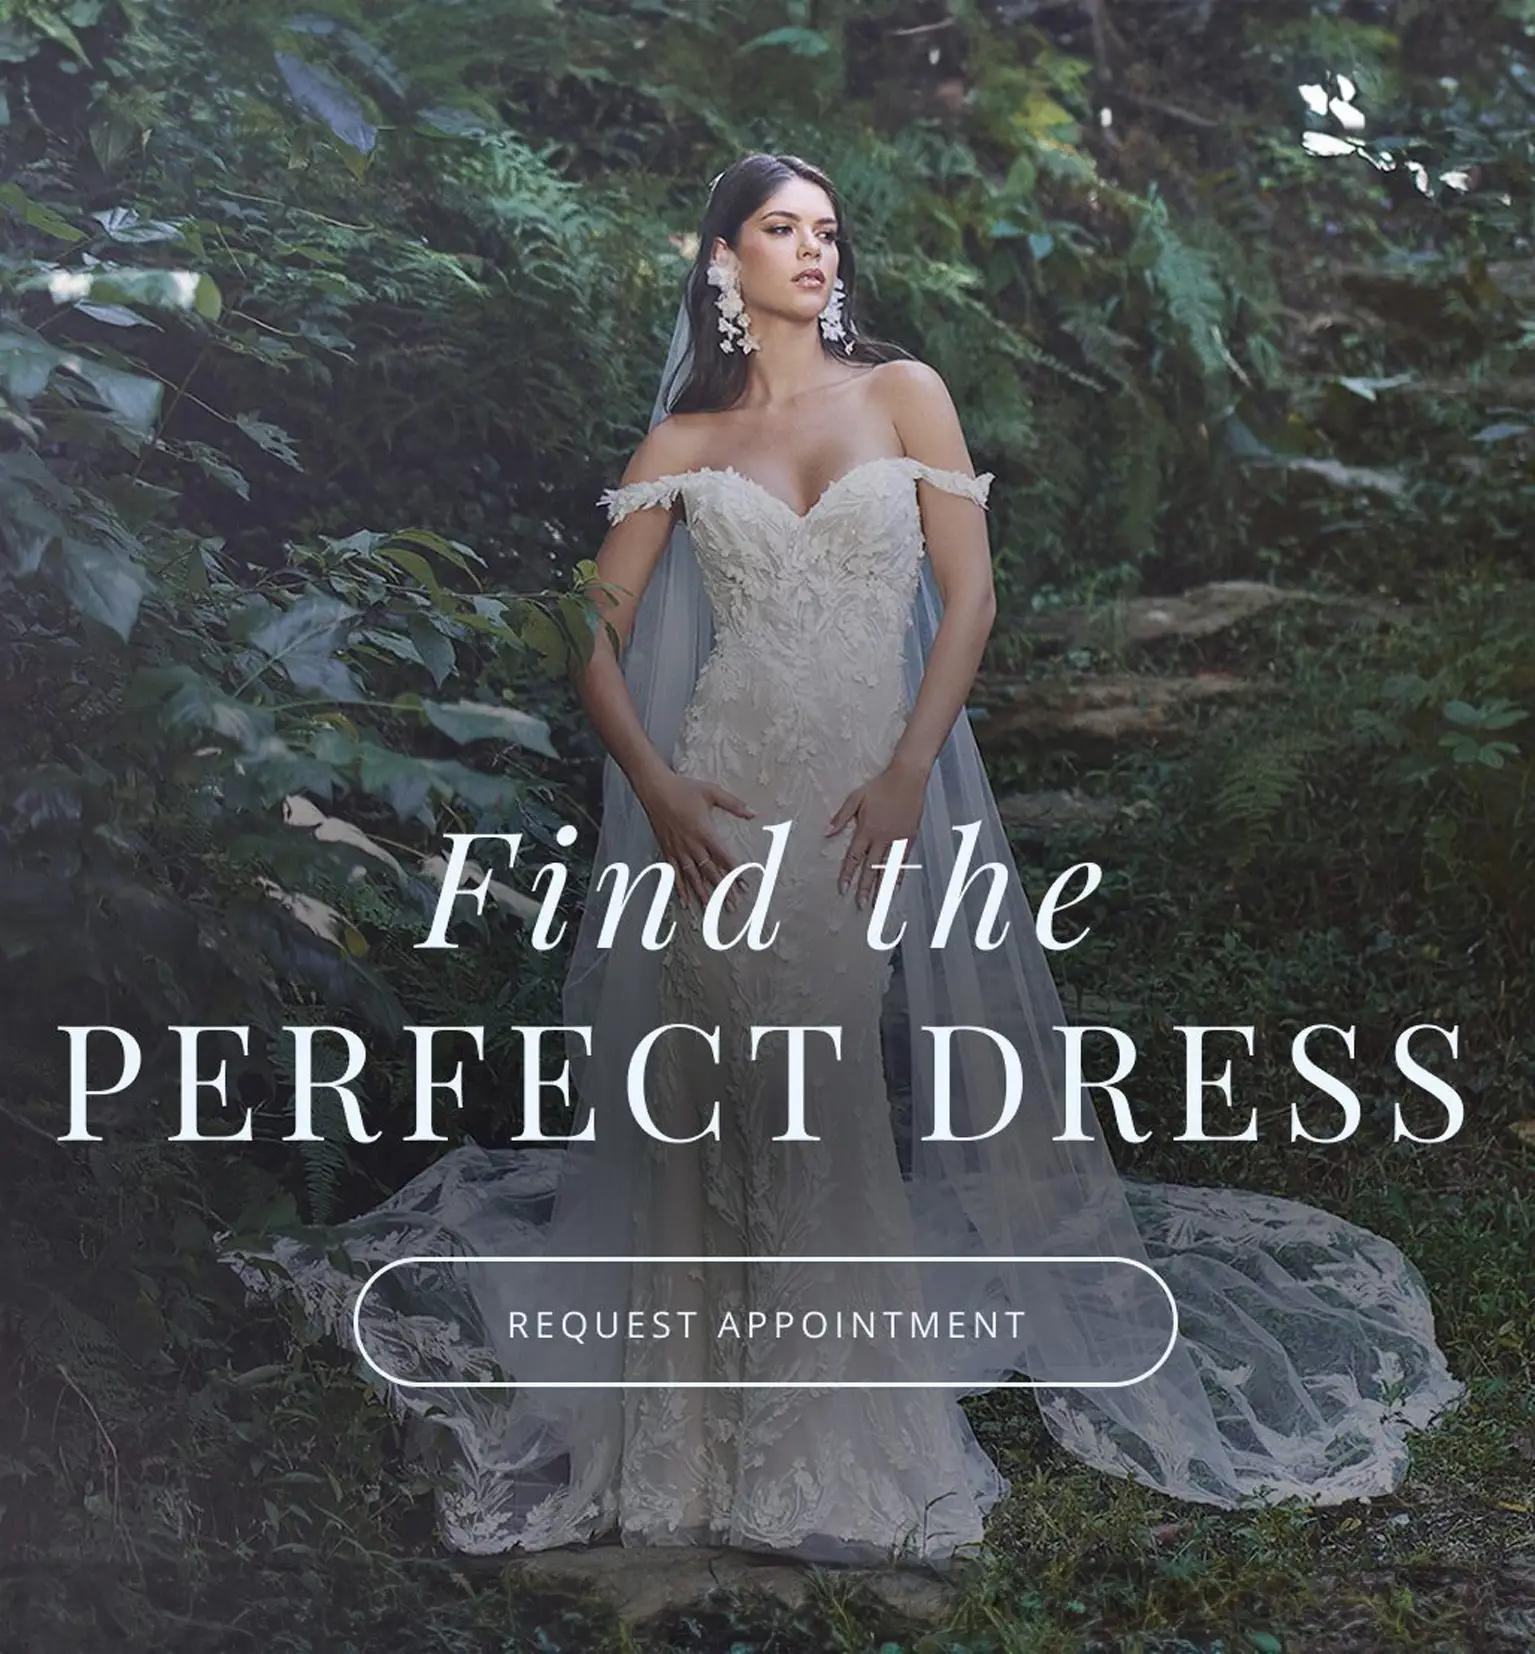 Find the perfect dress